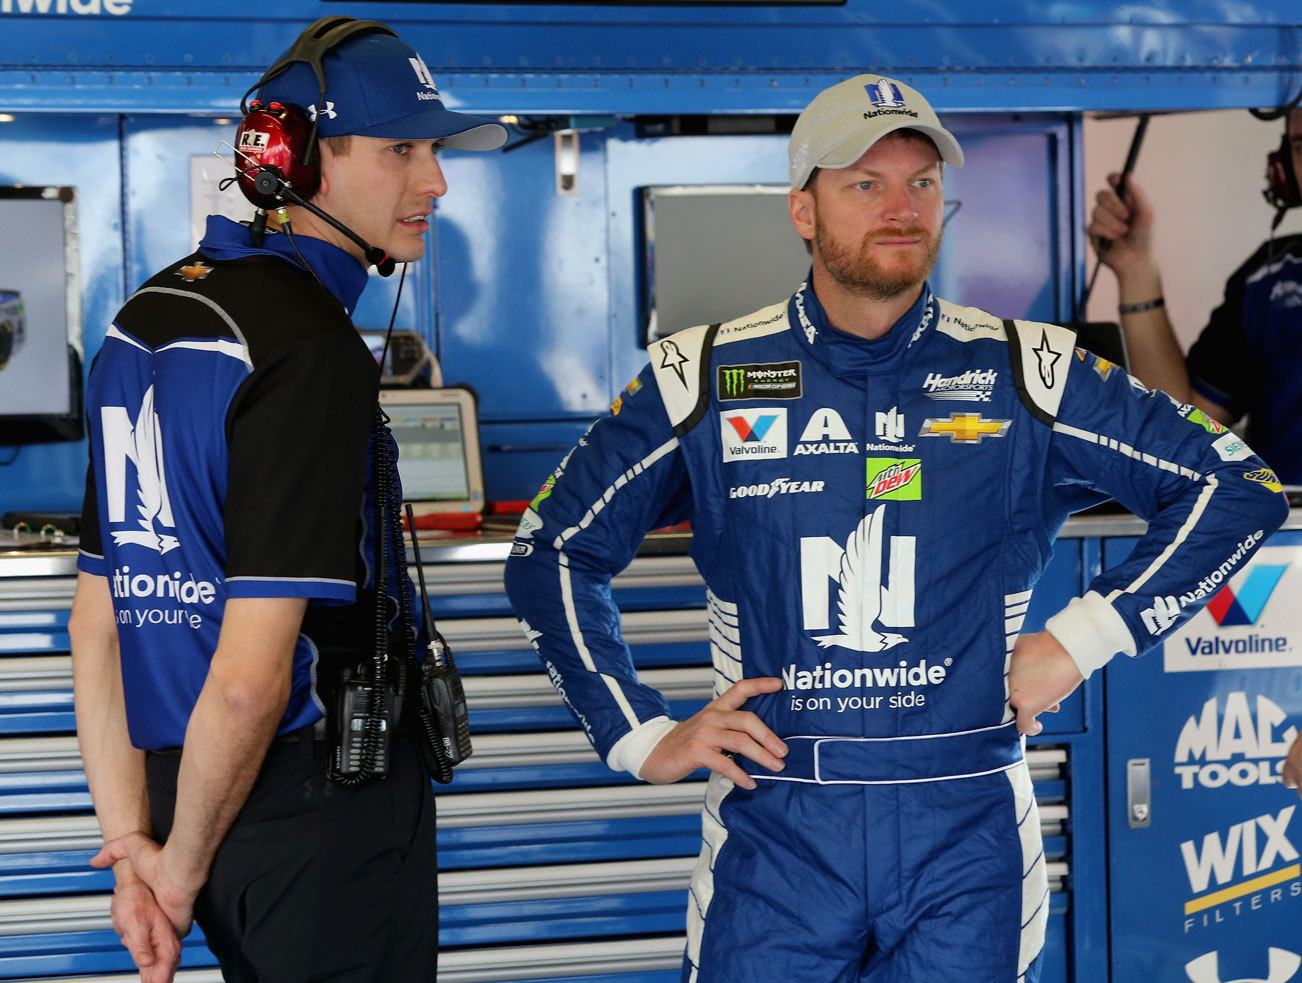 This could be final Daytona 500 for Dale Earnhardt Jr.